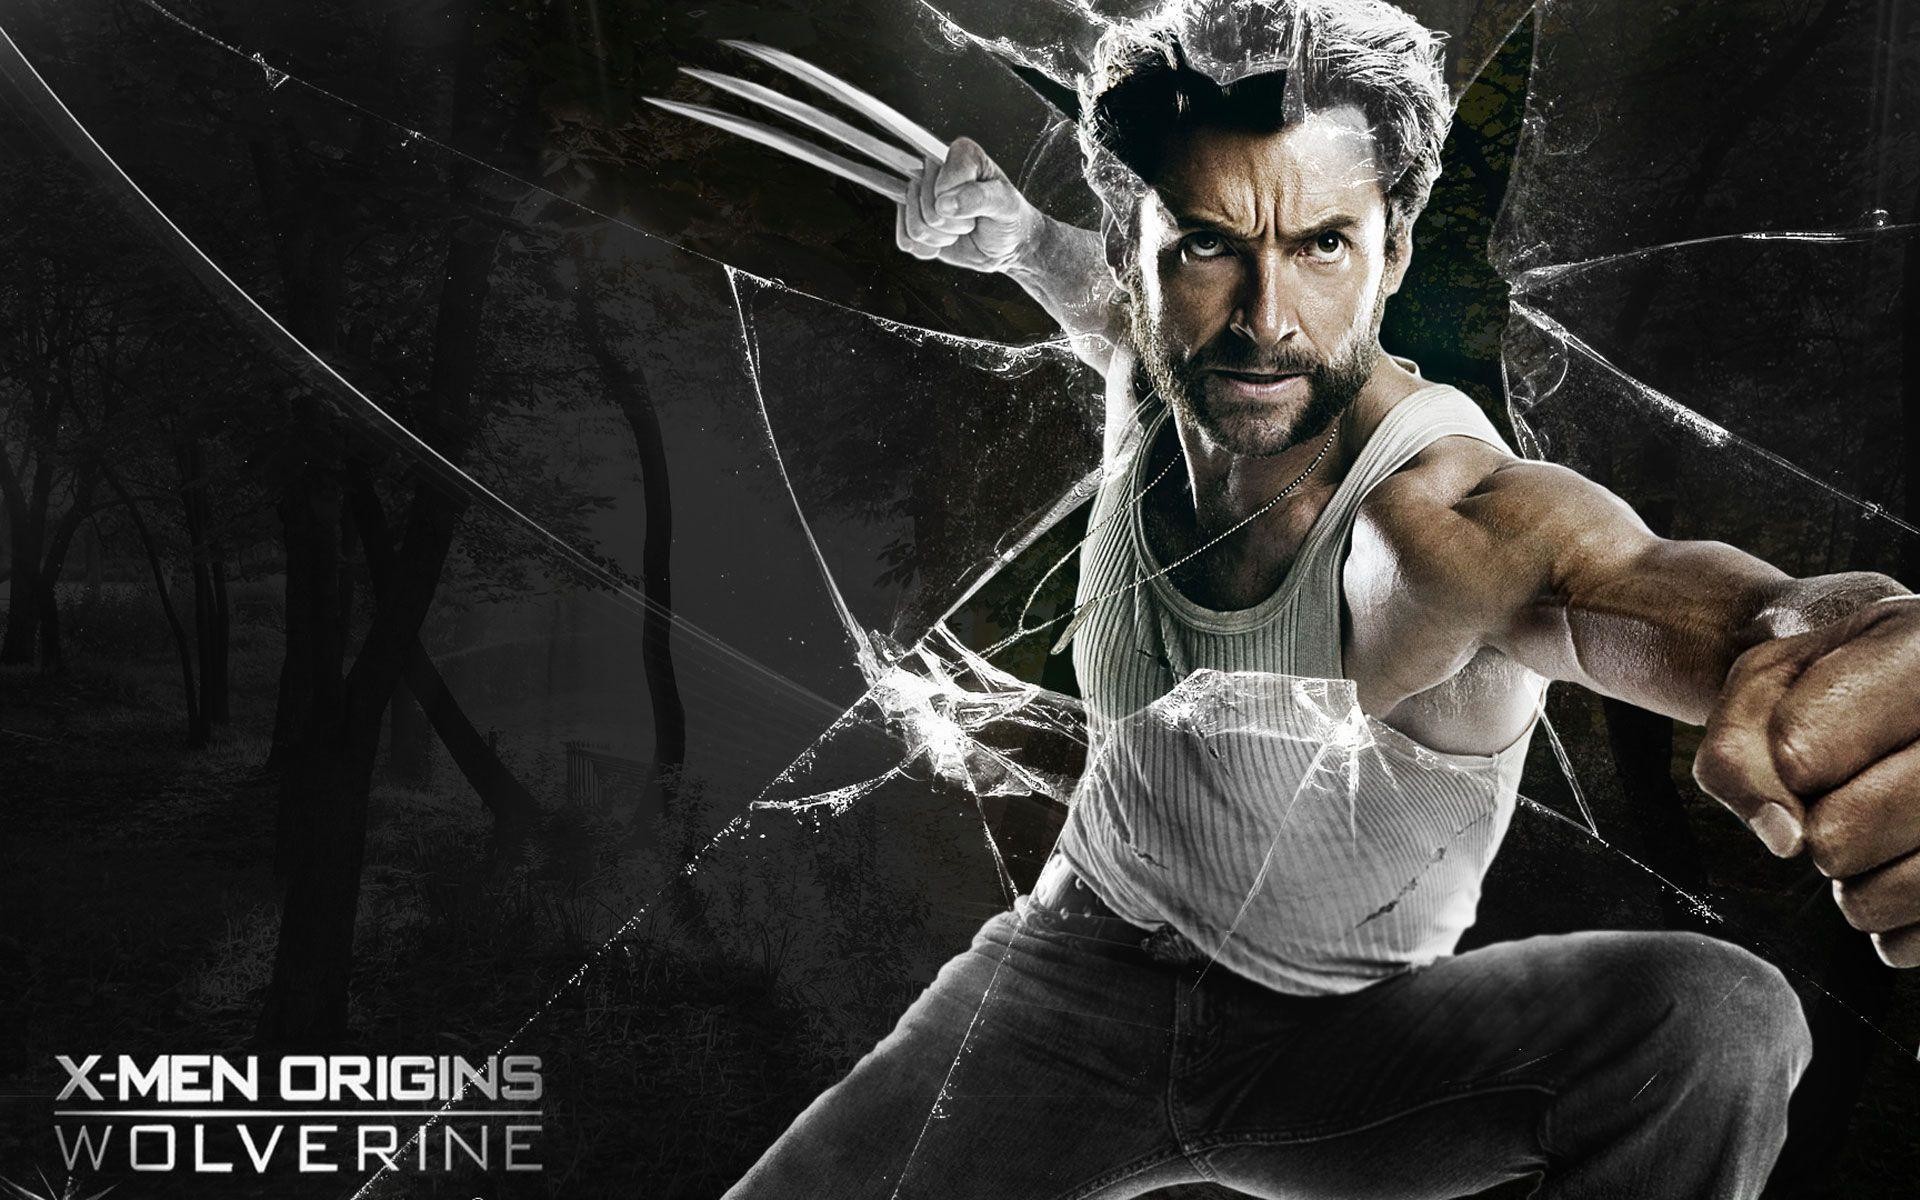 1920x1200 Wolverine desktop wallpapers in HD - spin off from X-Men movie